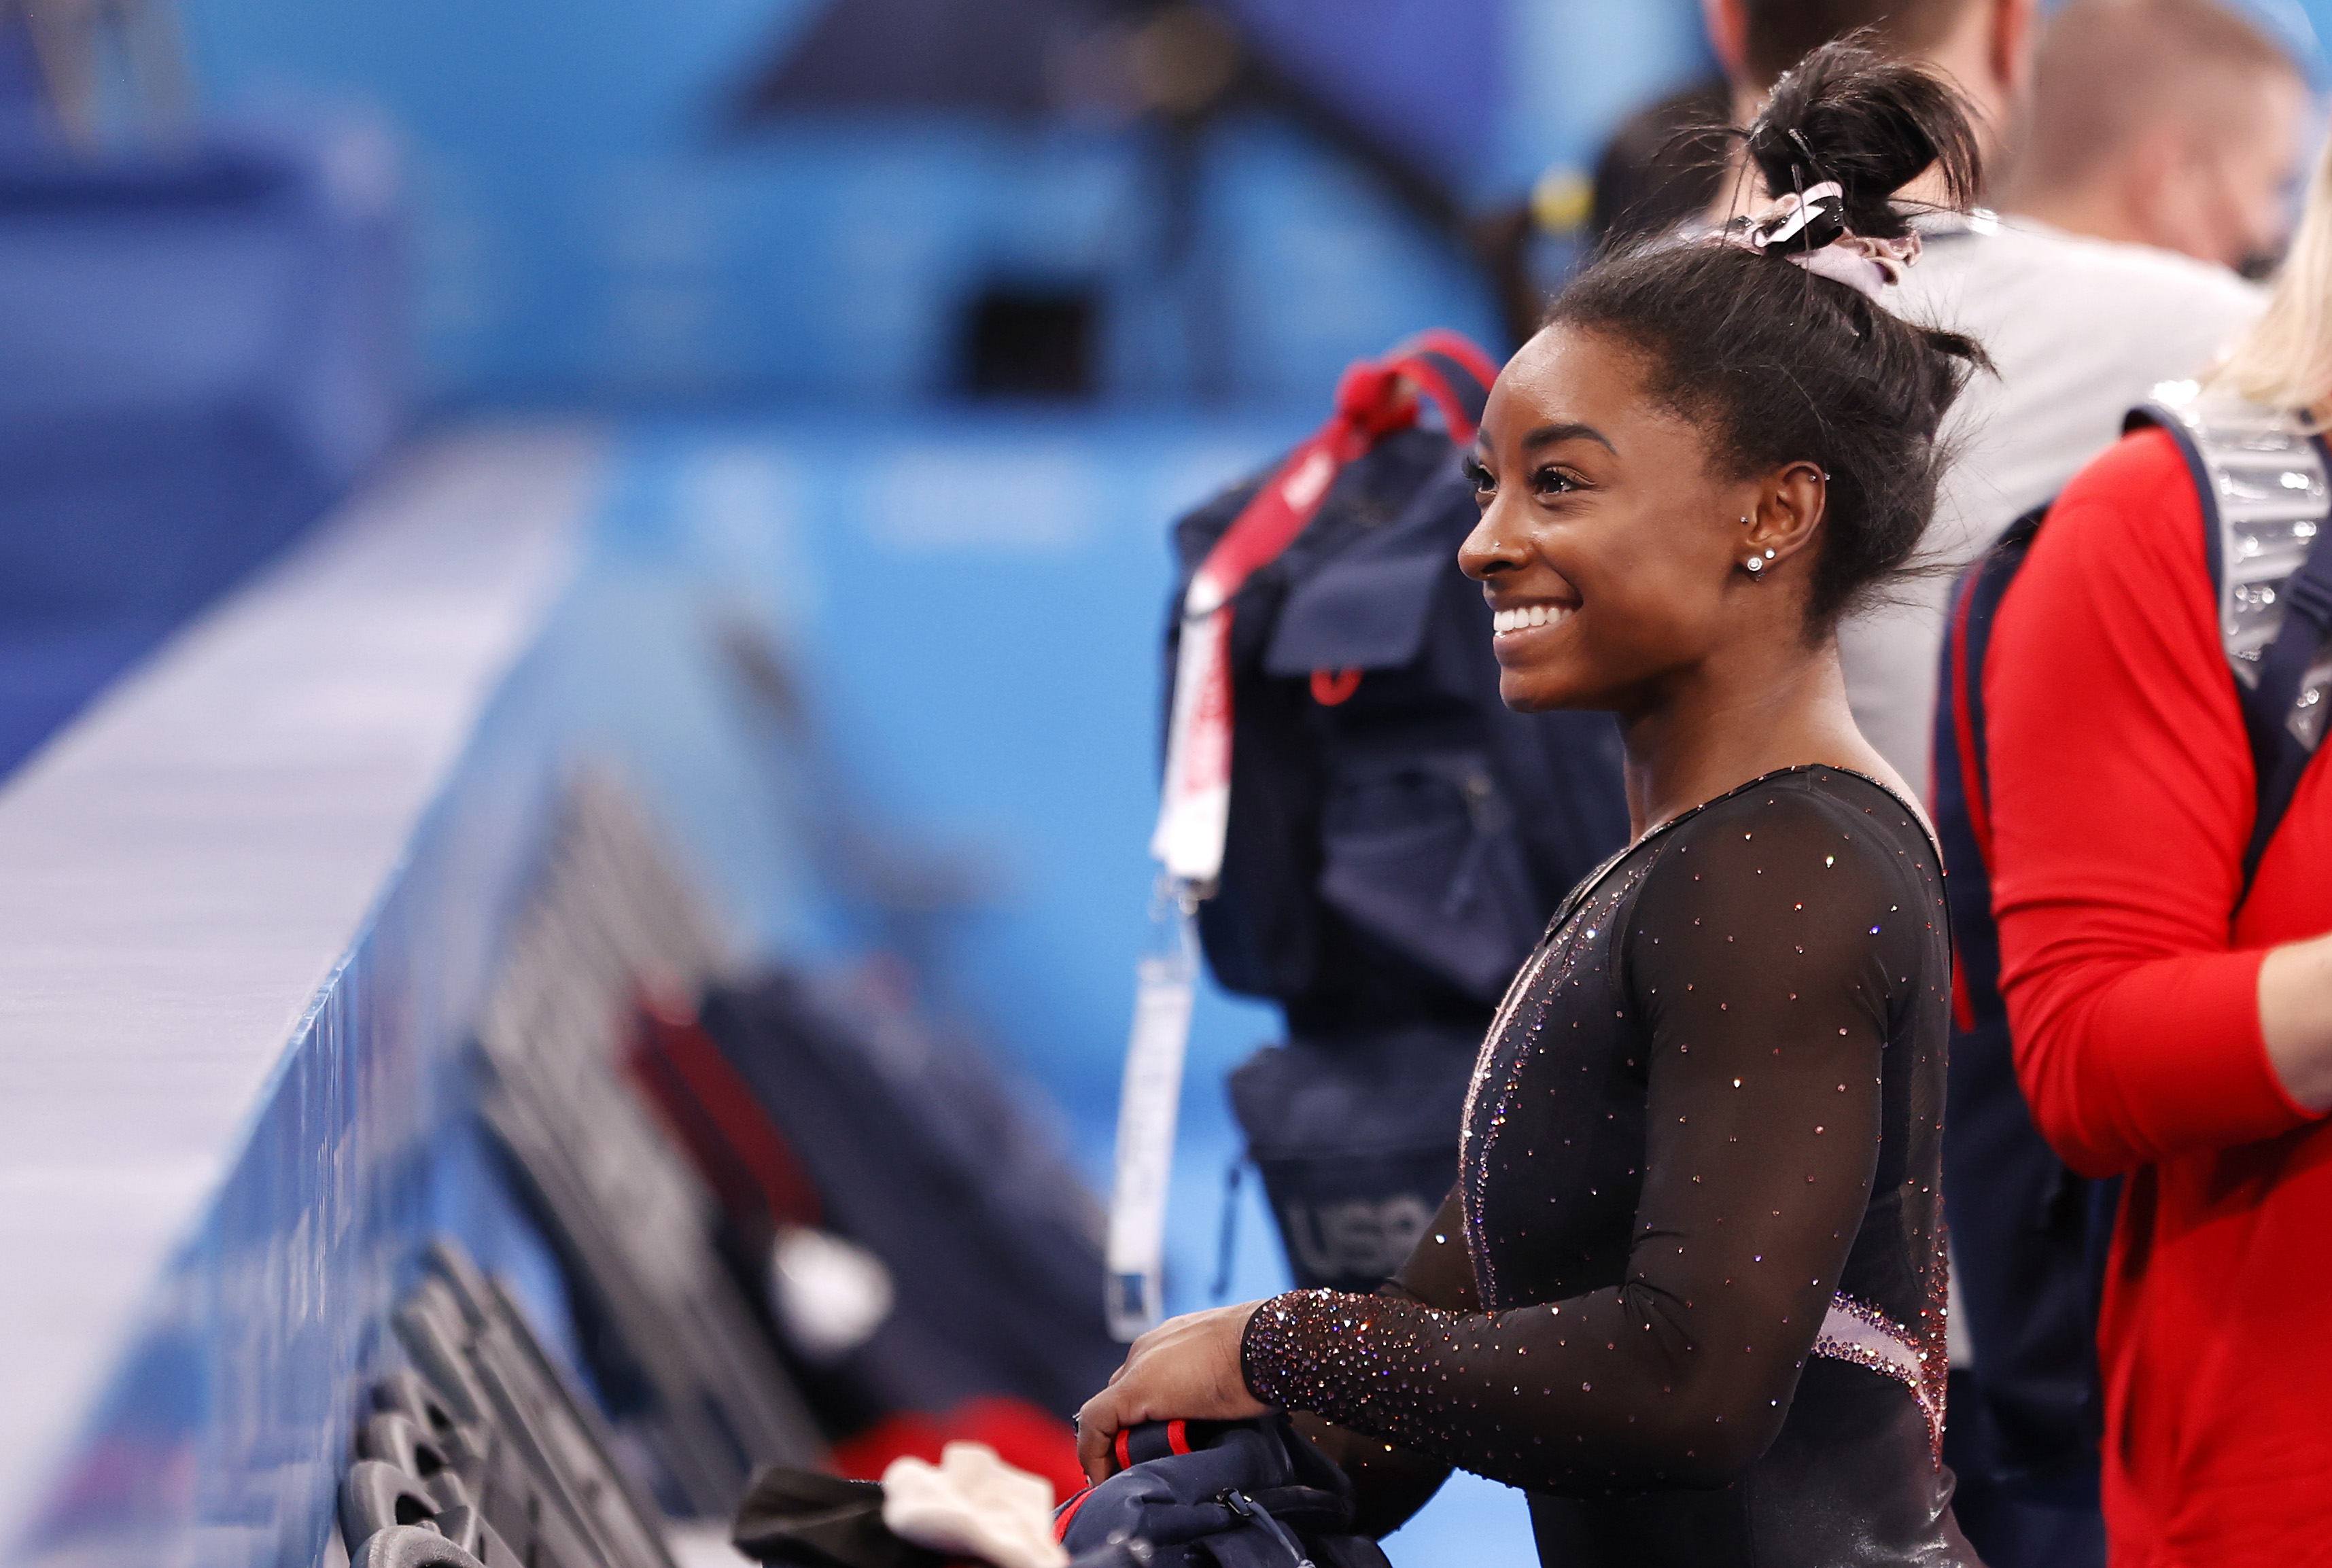 Simone Biles of Team United States reacts during Women’s Podium Training ahead of the Tokyo 2020 Olympic Games at Ariake Gymnastics Centre on July 22, 2021 in Tokyo, Japan.